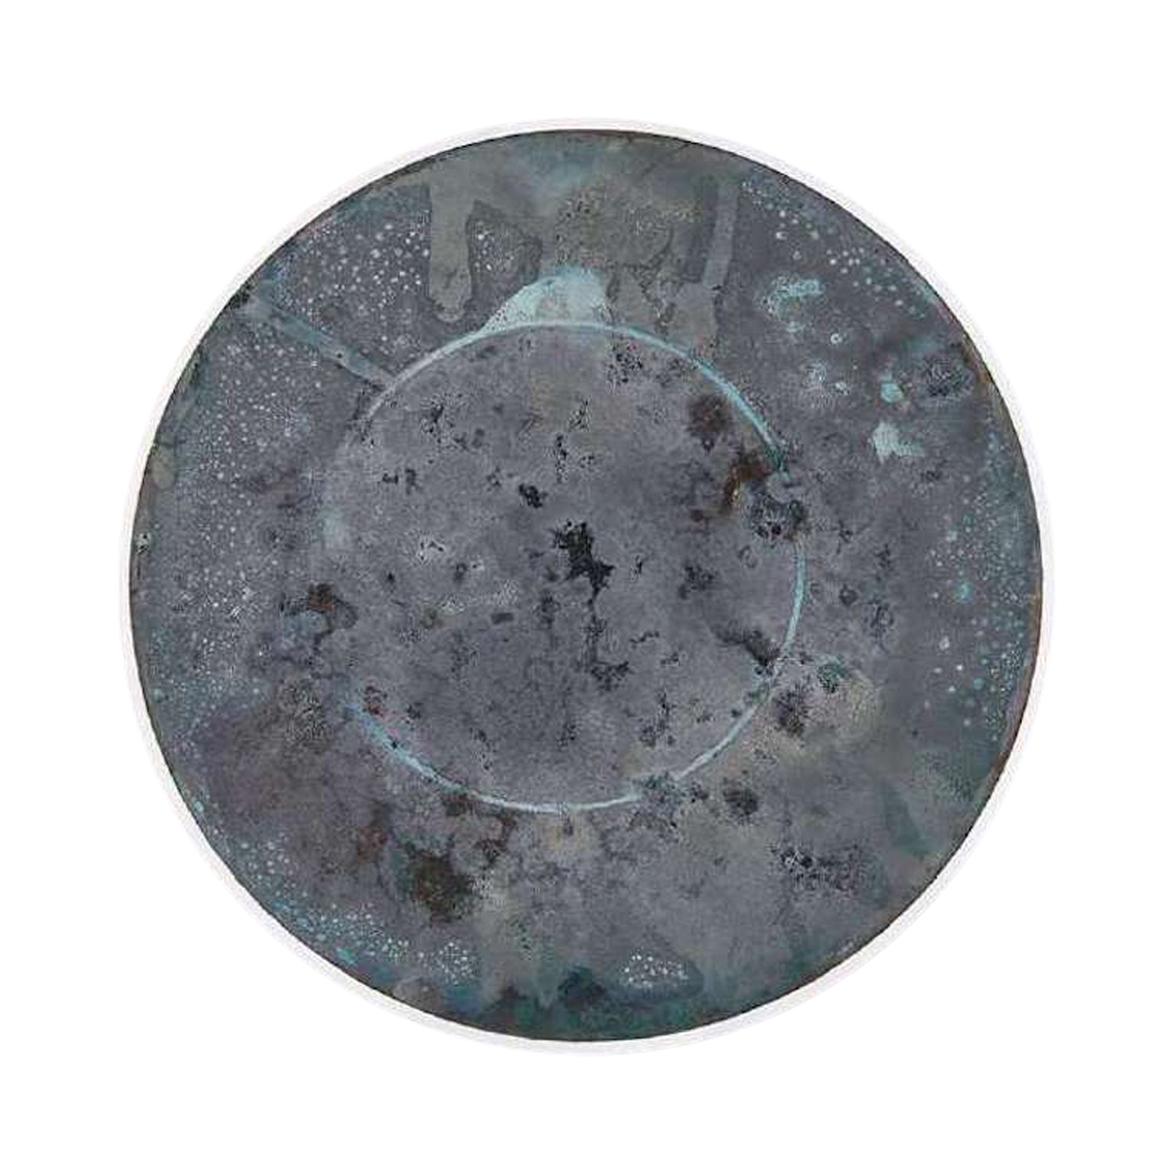 Copper & Stainless Steel Decor/ Plate, 'Star Dust 3.0 #4' by Daishi Luo